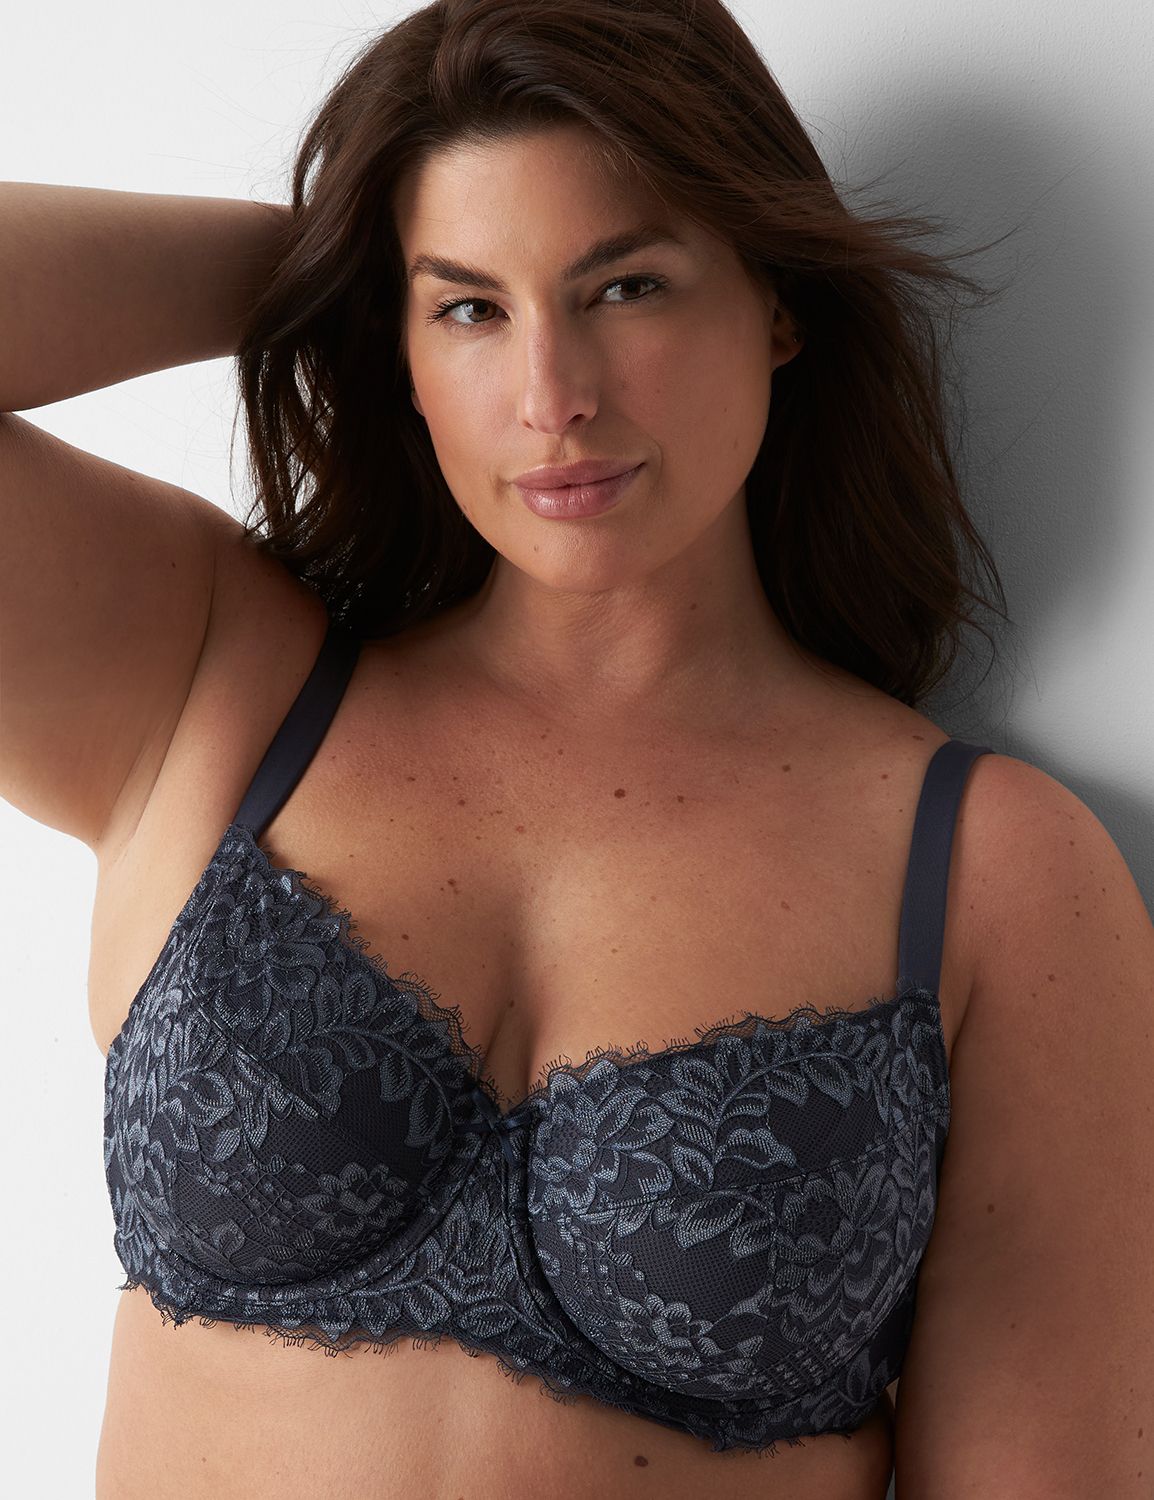 Torrid 42 DDD Brand New Bra with lace very supportive with tags.